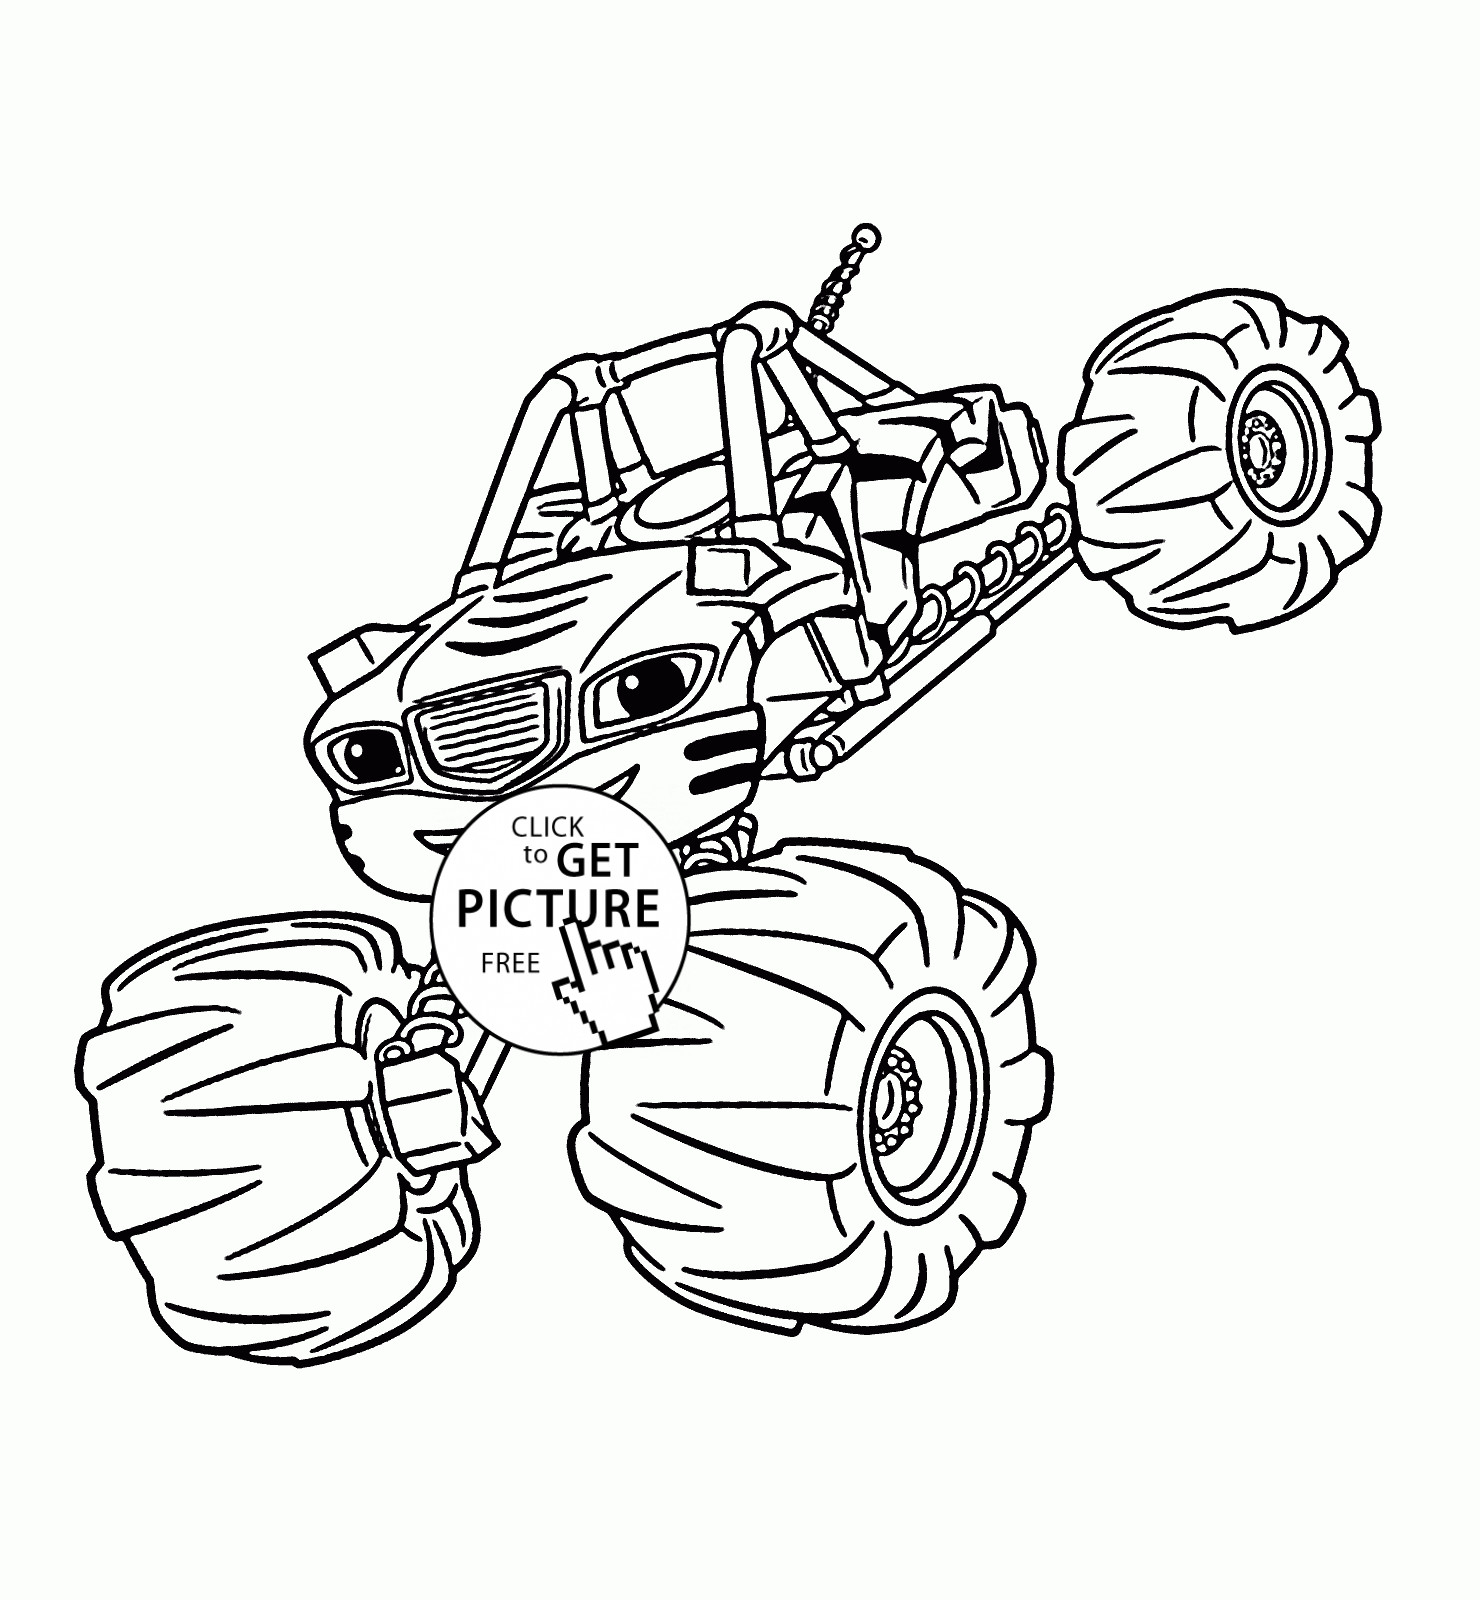 Coloring Pages For Boys Blaze
 Blaze Monster Truck Stripes coloring page for kids